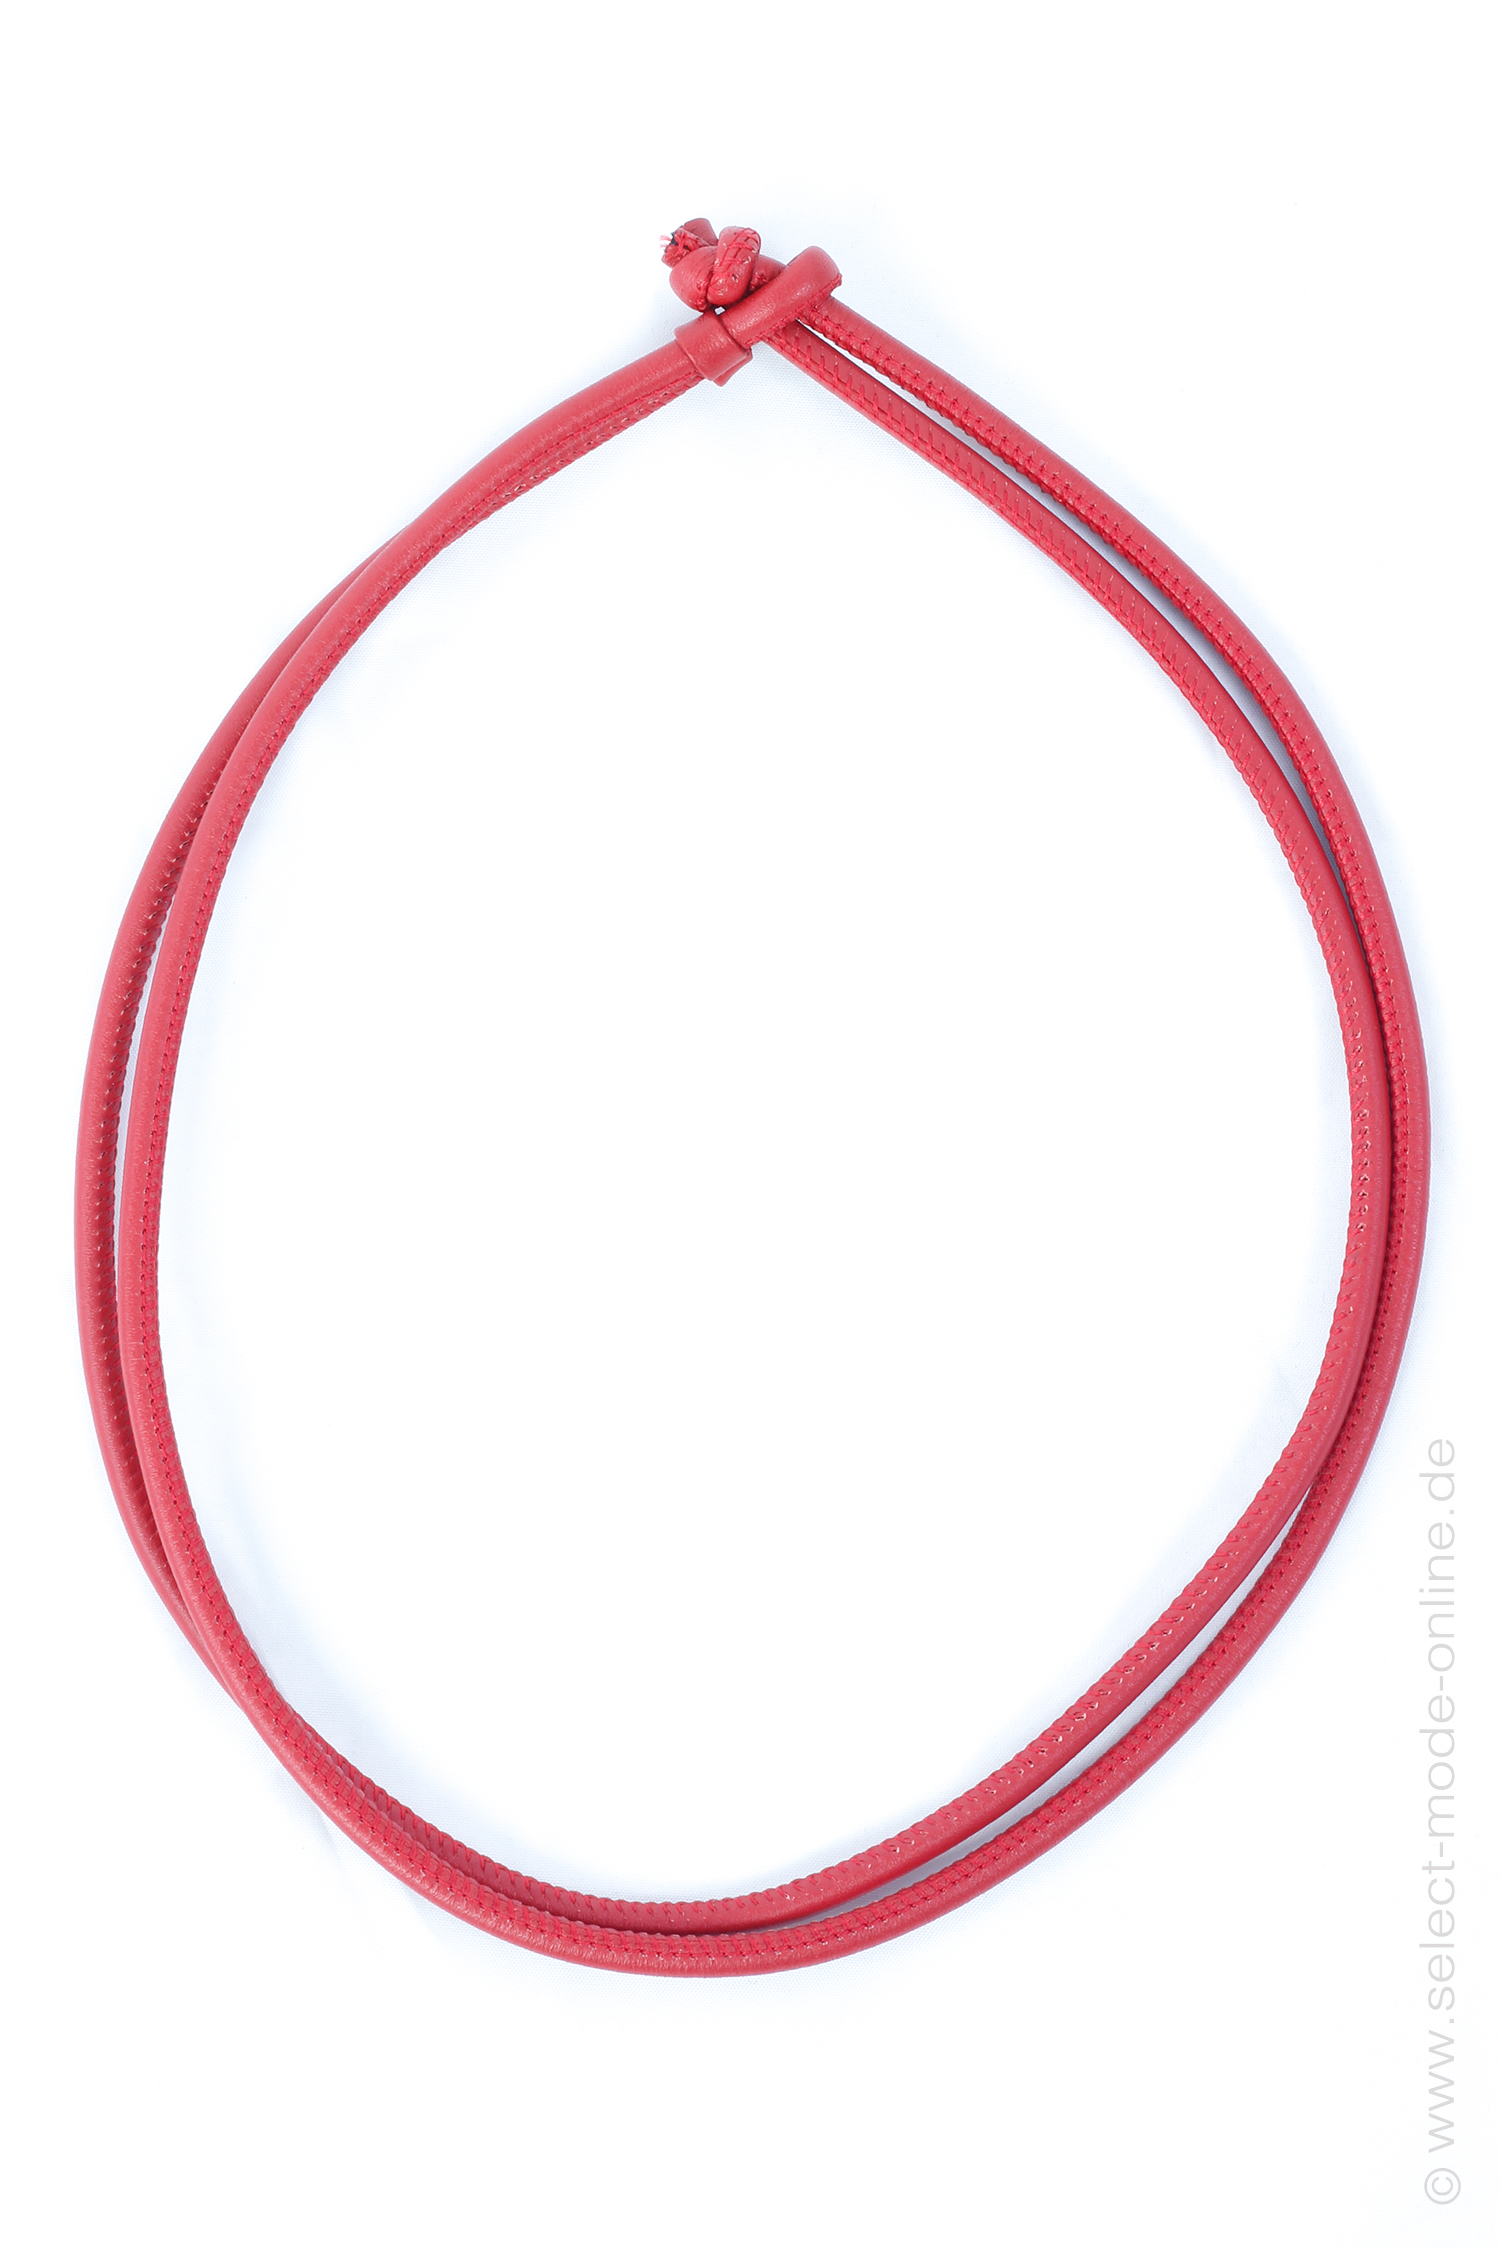 Leather necklace 2 - 60 cm - red  - DG015